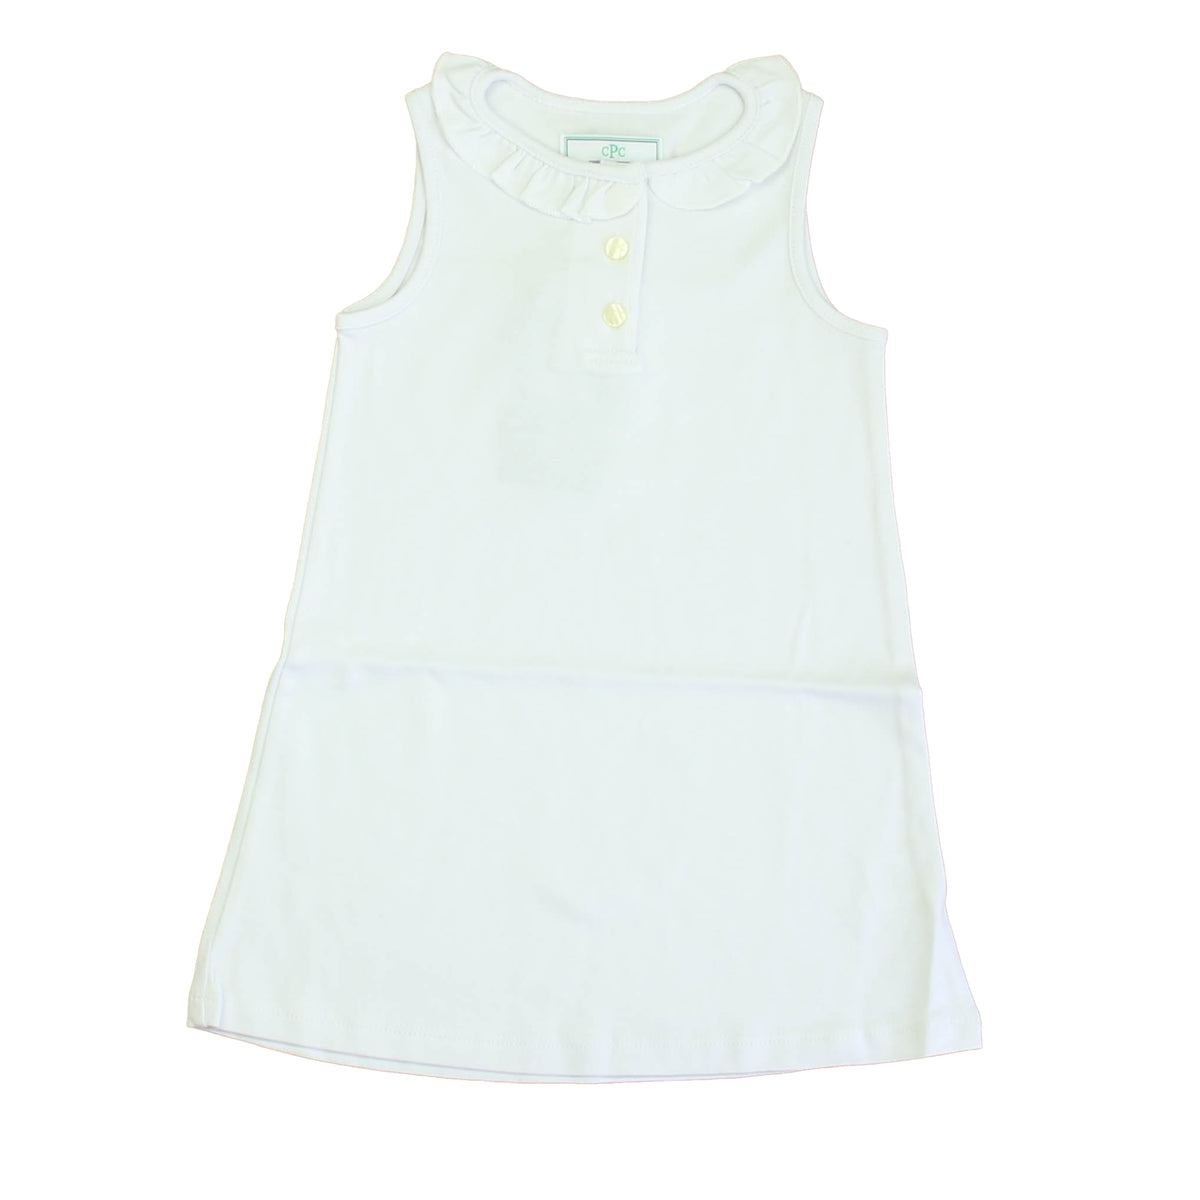 New with Tags: White Dress size: 2-5T -- FINAL SALE